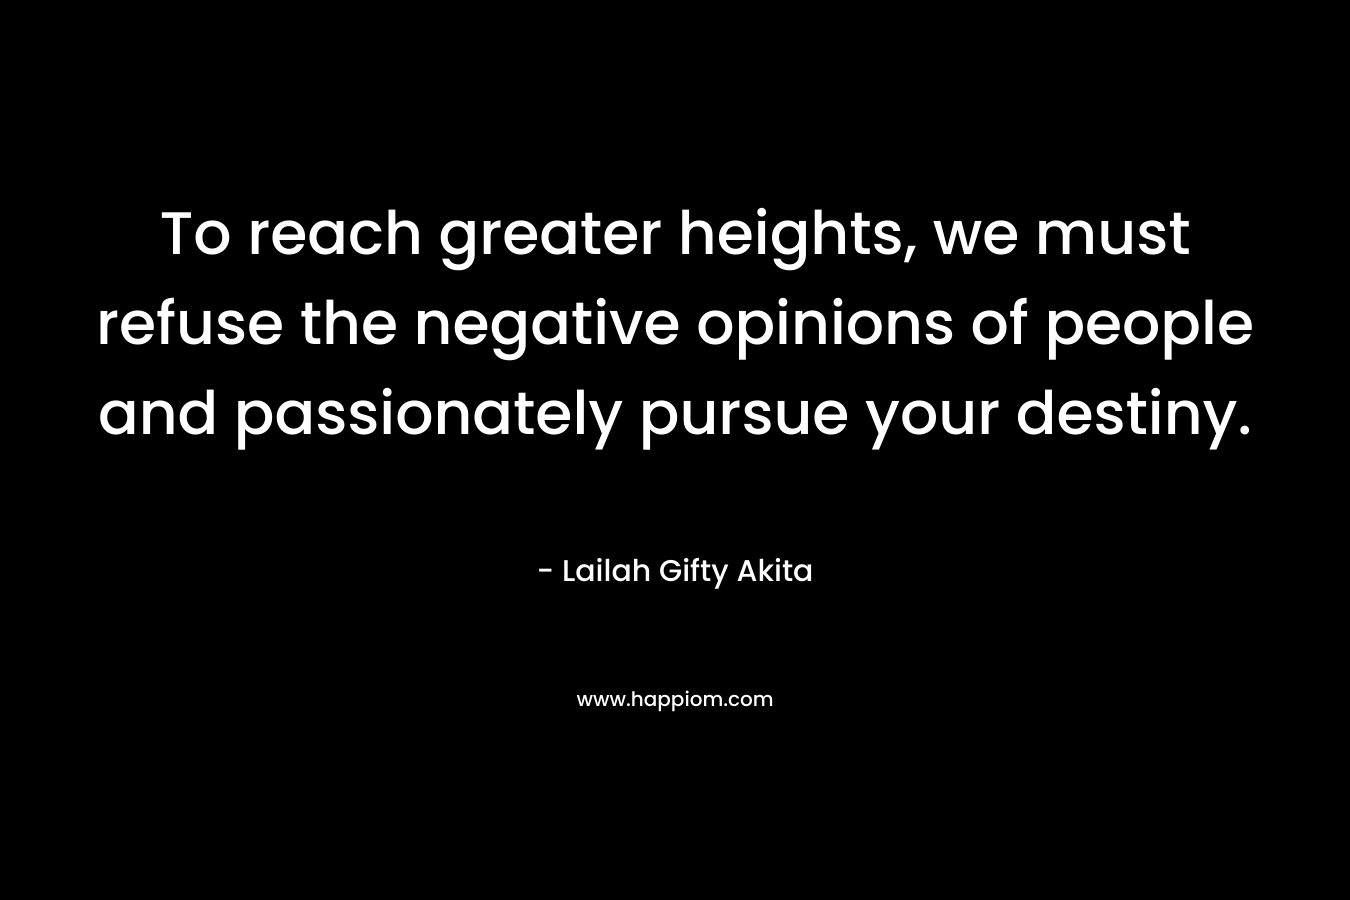 To reach greater heights, we must refuse the negative opinions of people and passionately pursue your destiny.